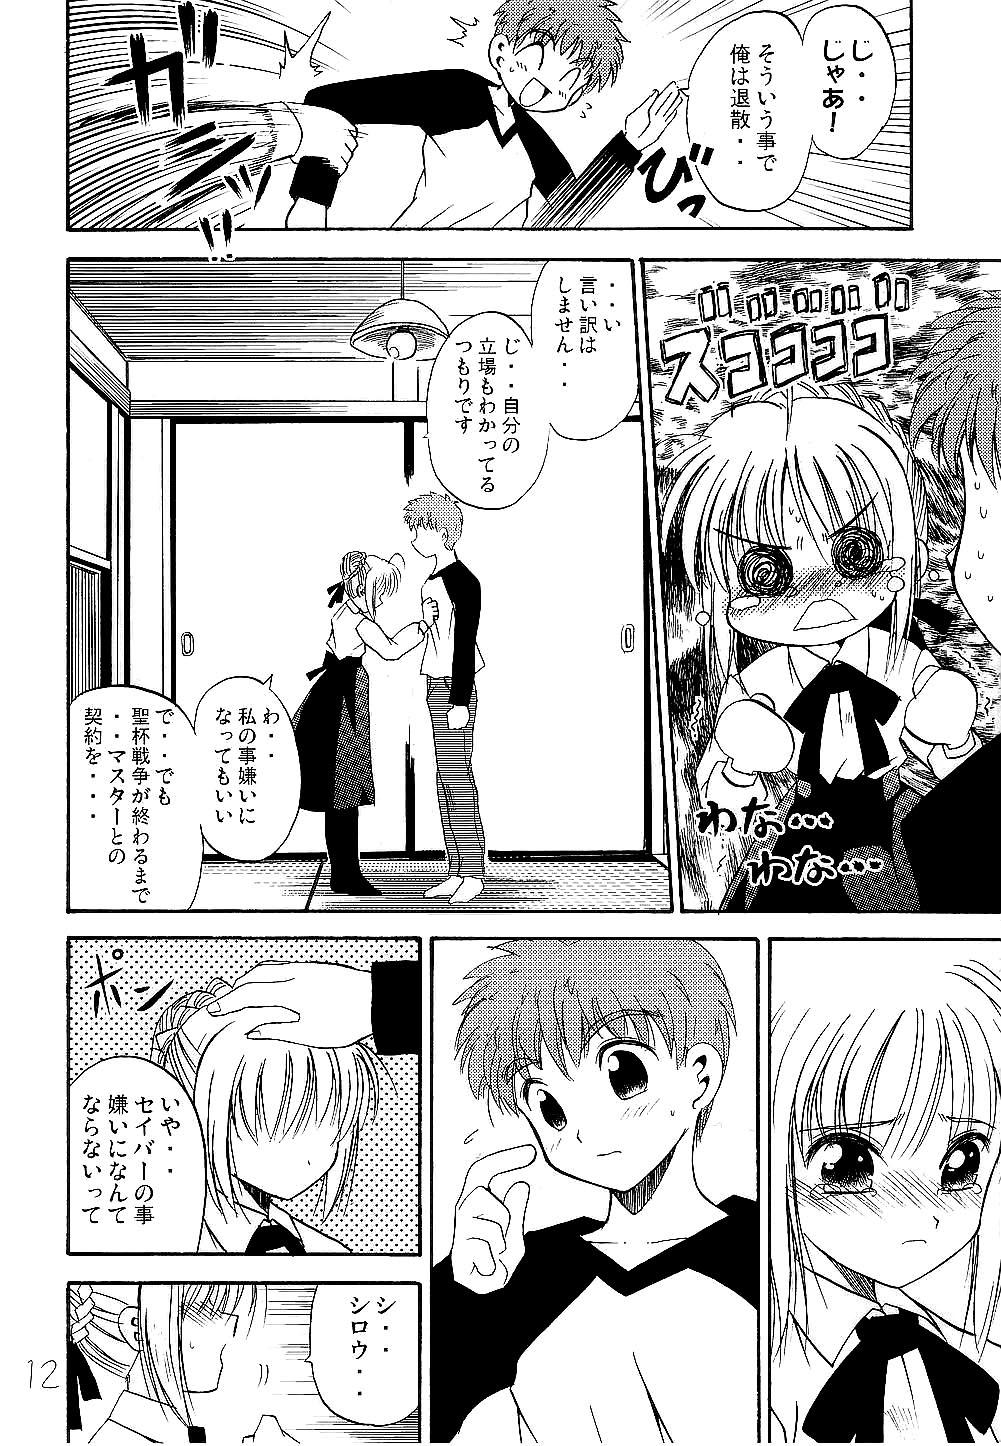 Toying Saber Crash! - Fate stay night Hard - Page 11